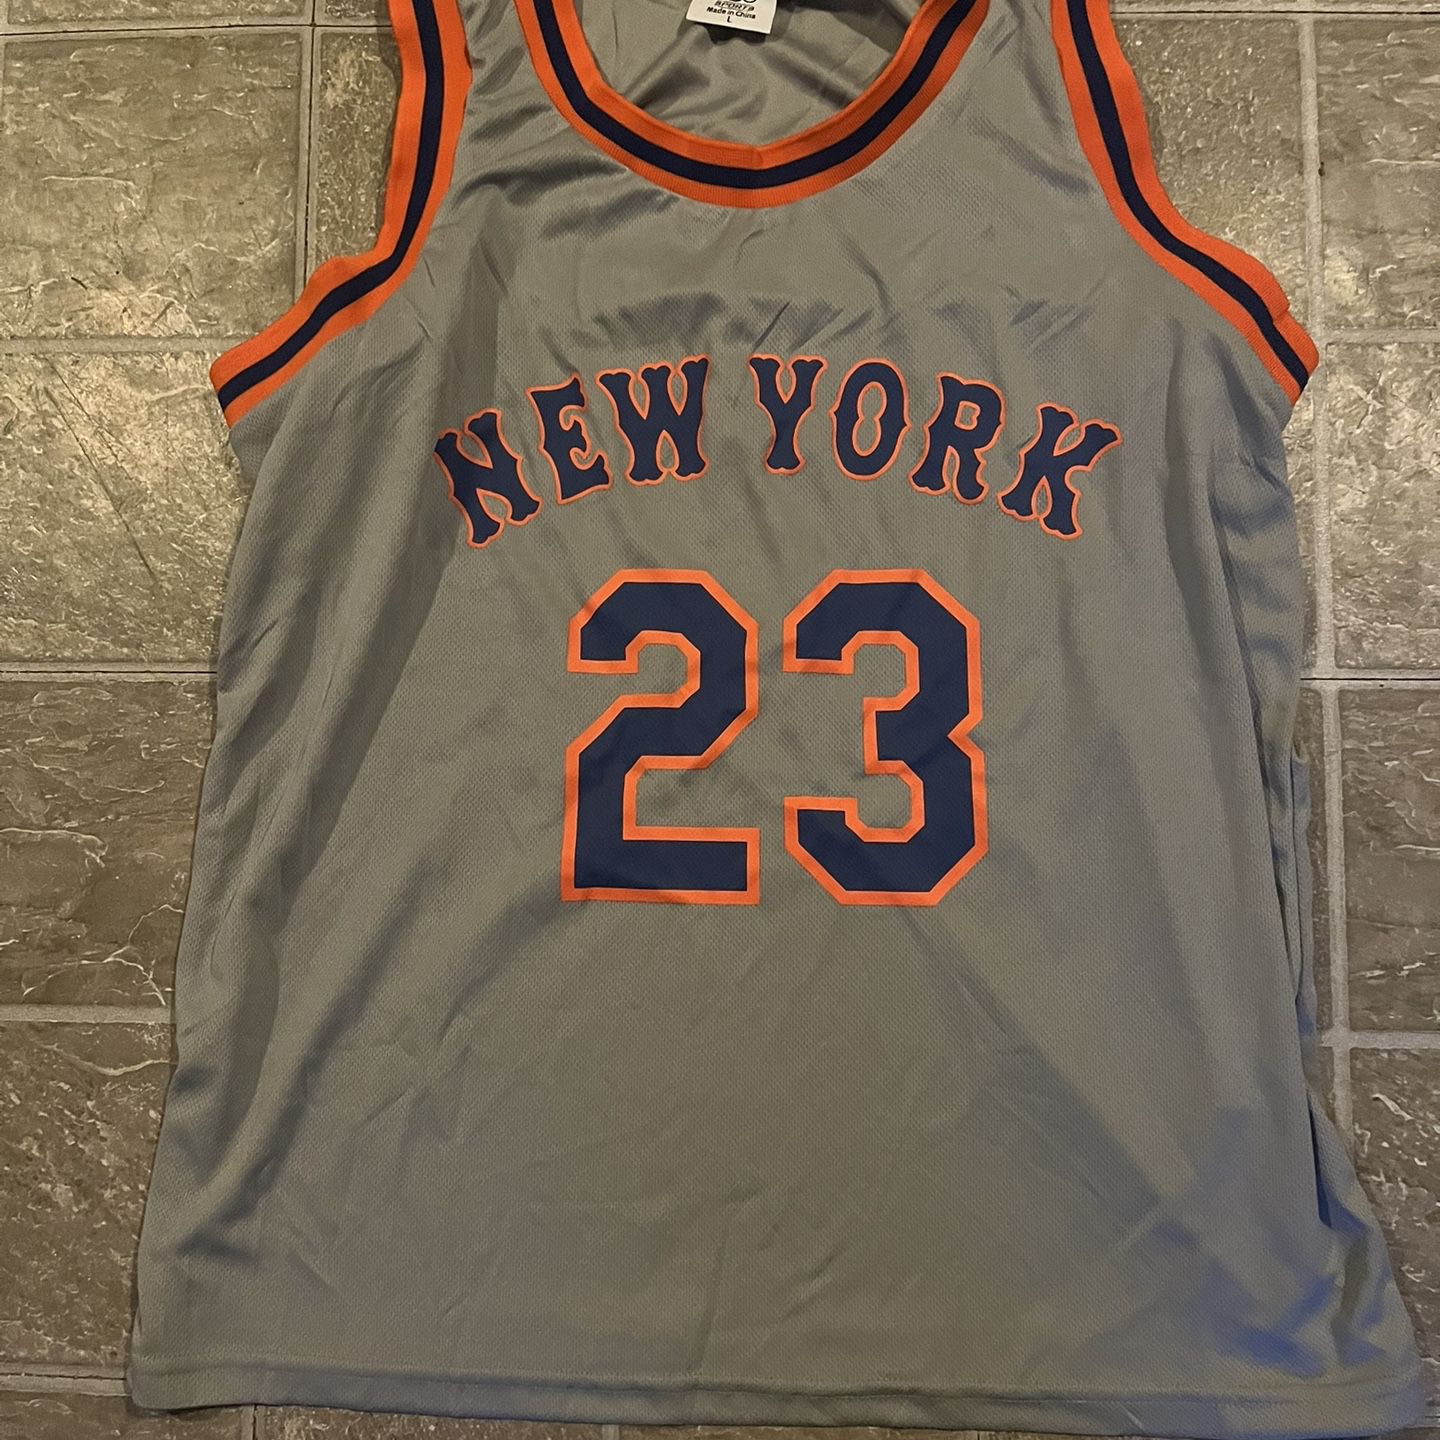 mets basketball jersey giveaway